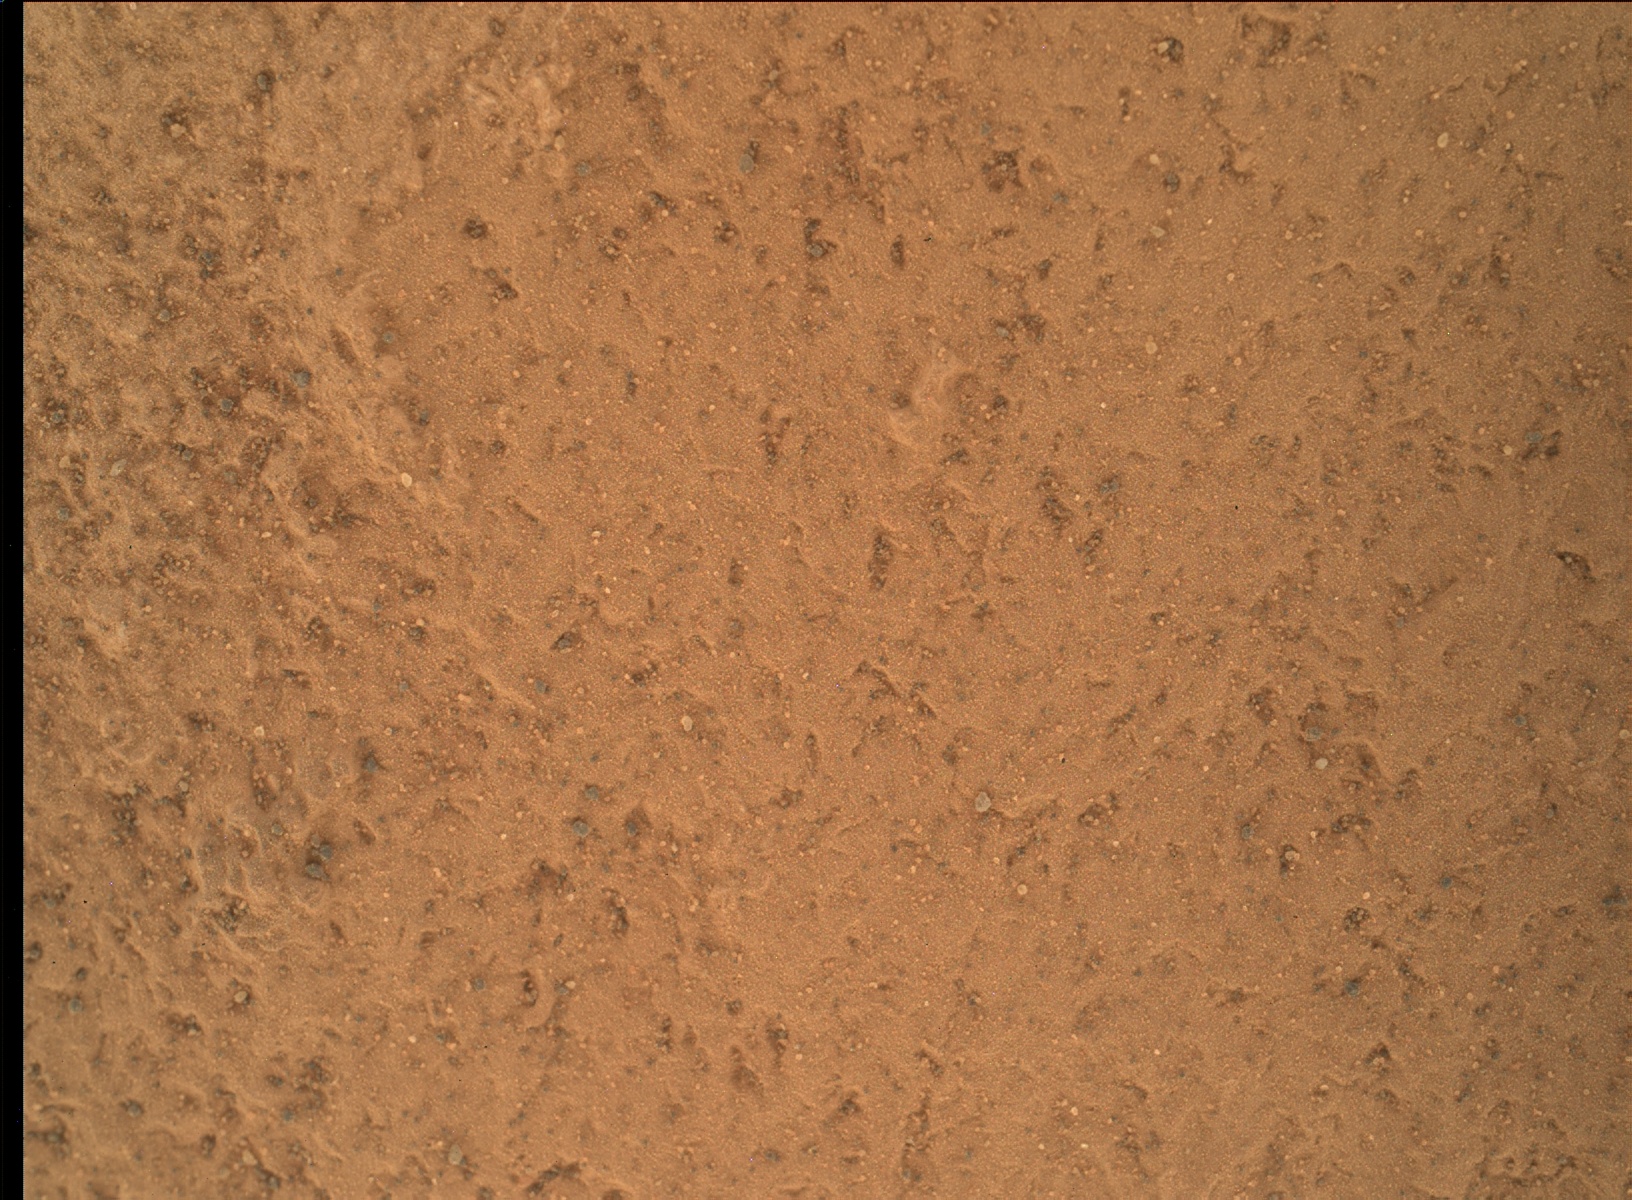 Nasa's Mars rover Curiosity acquired this image using its Mars Hand Lens Imager (MAHLI) on Sol 1802